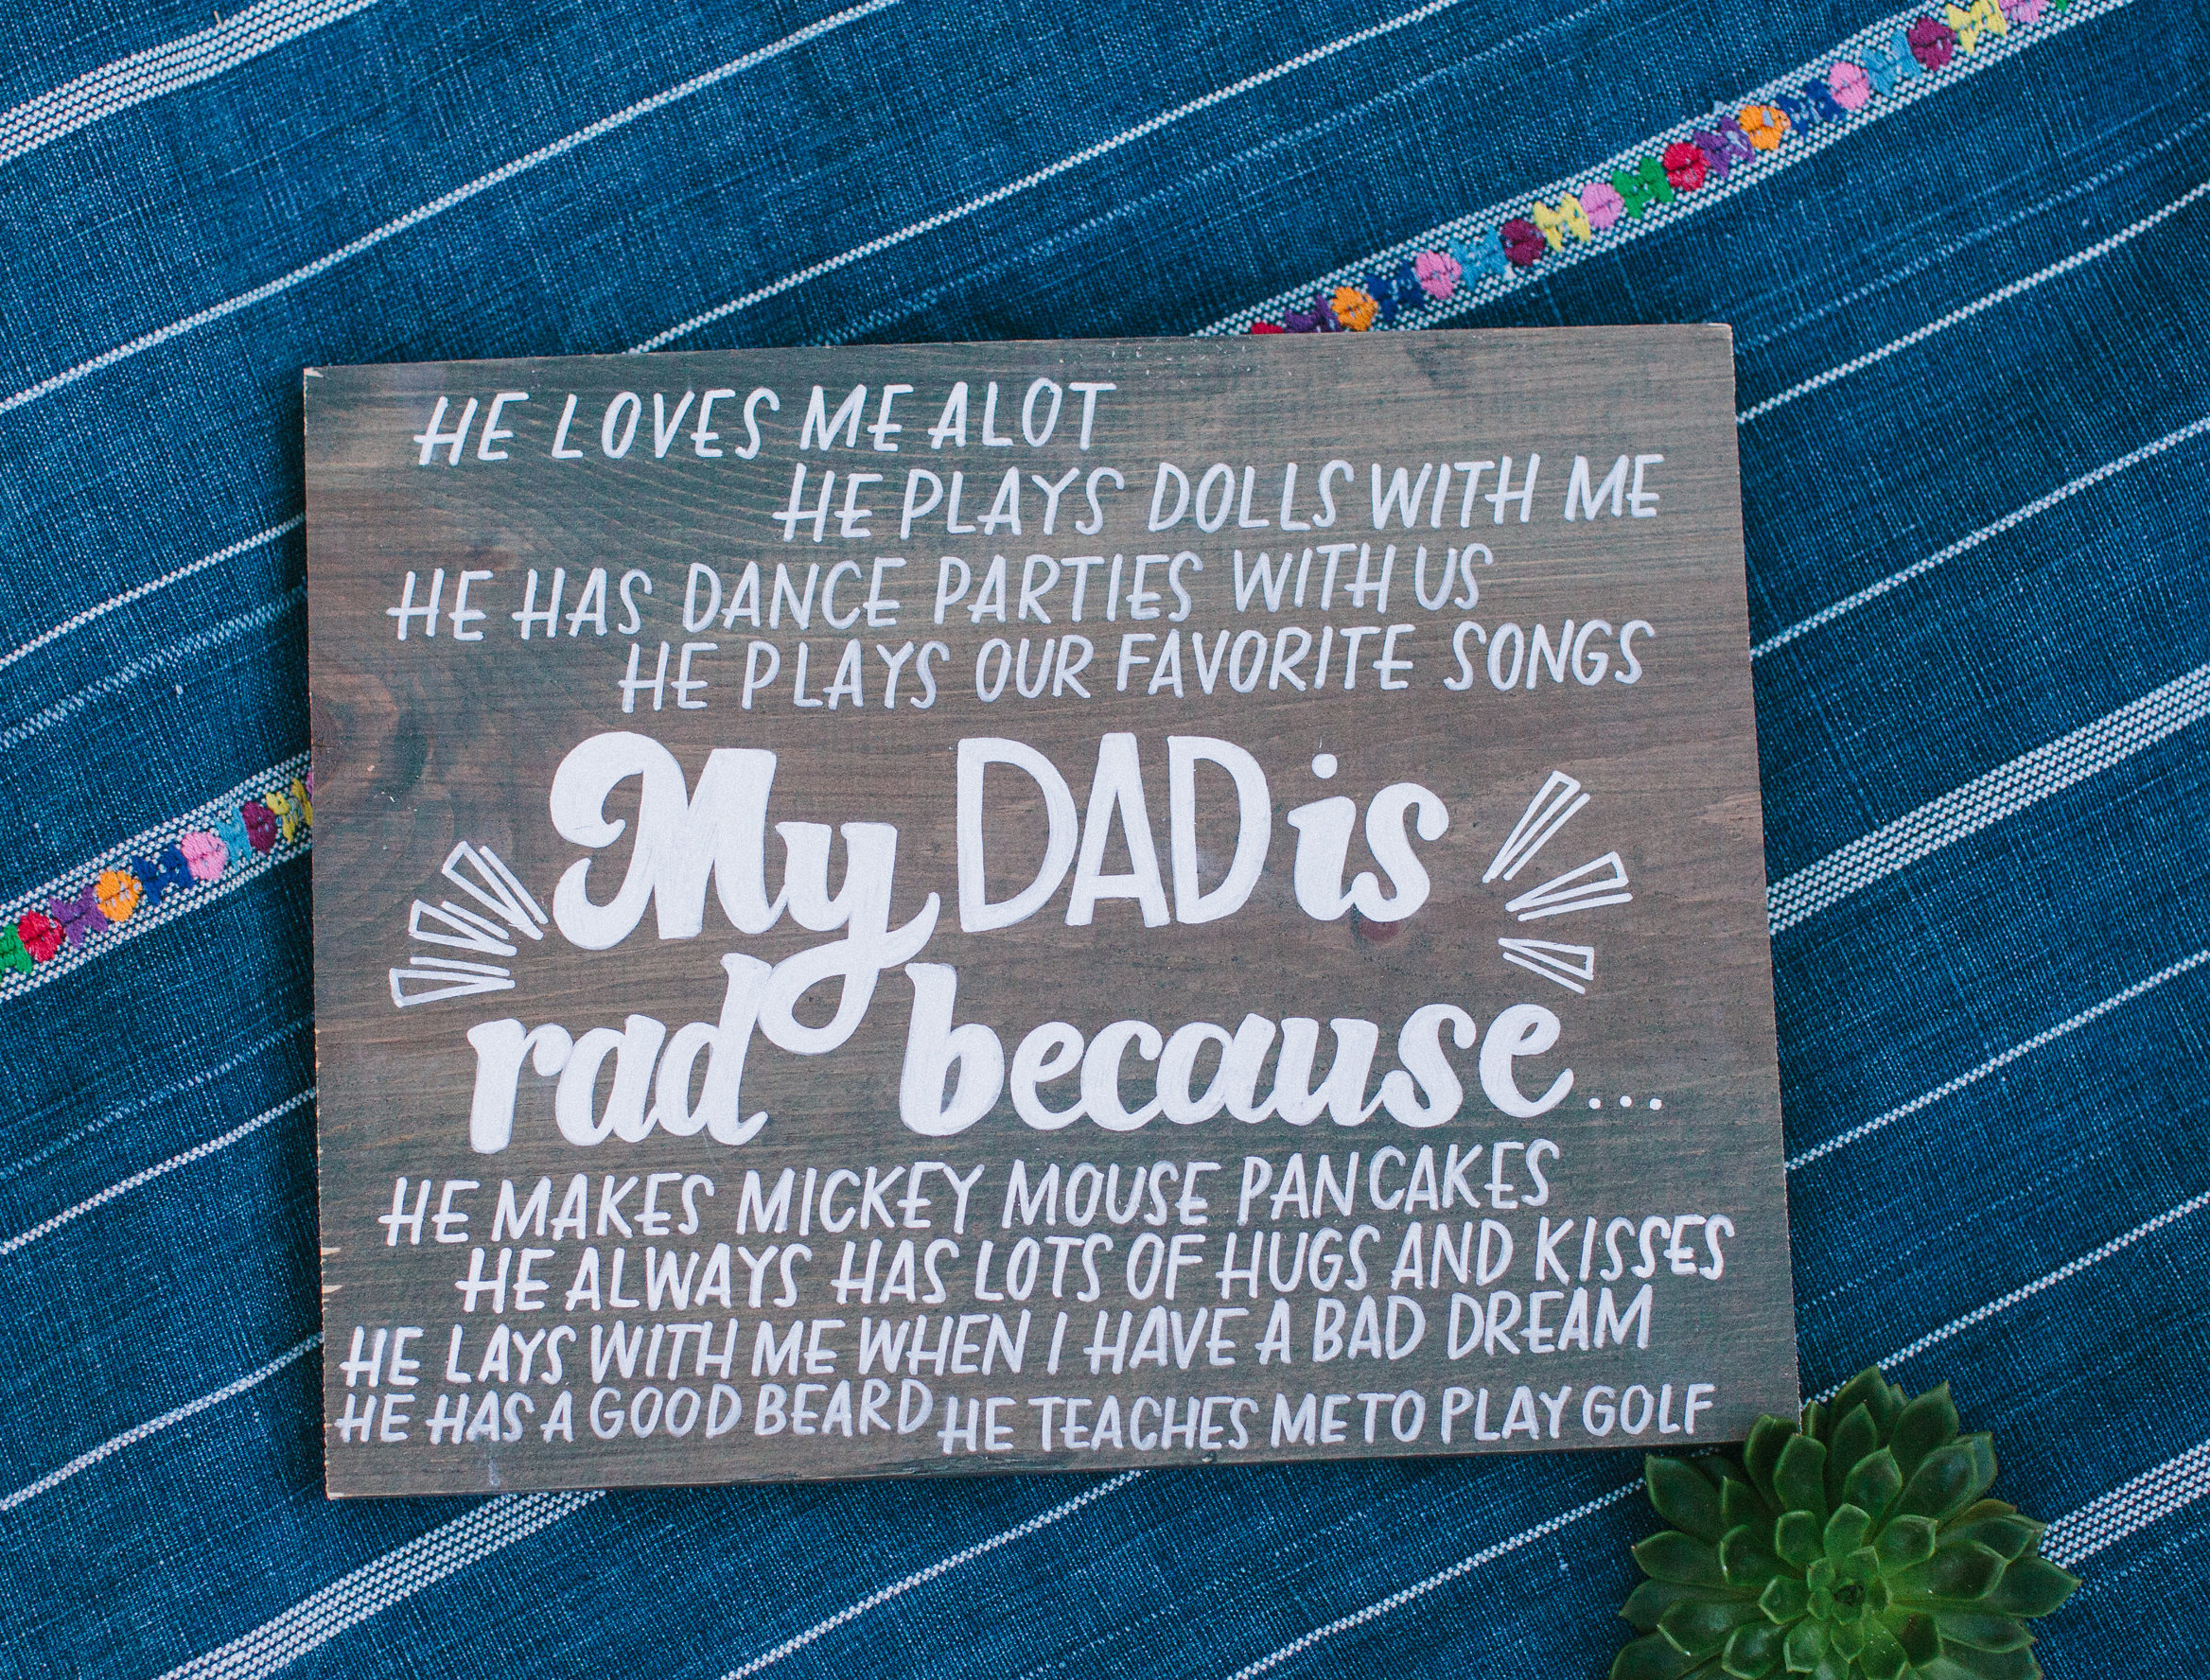 My Dad is Rad because….